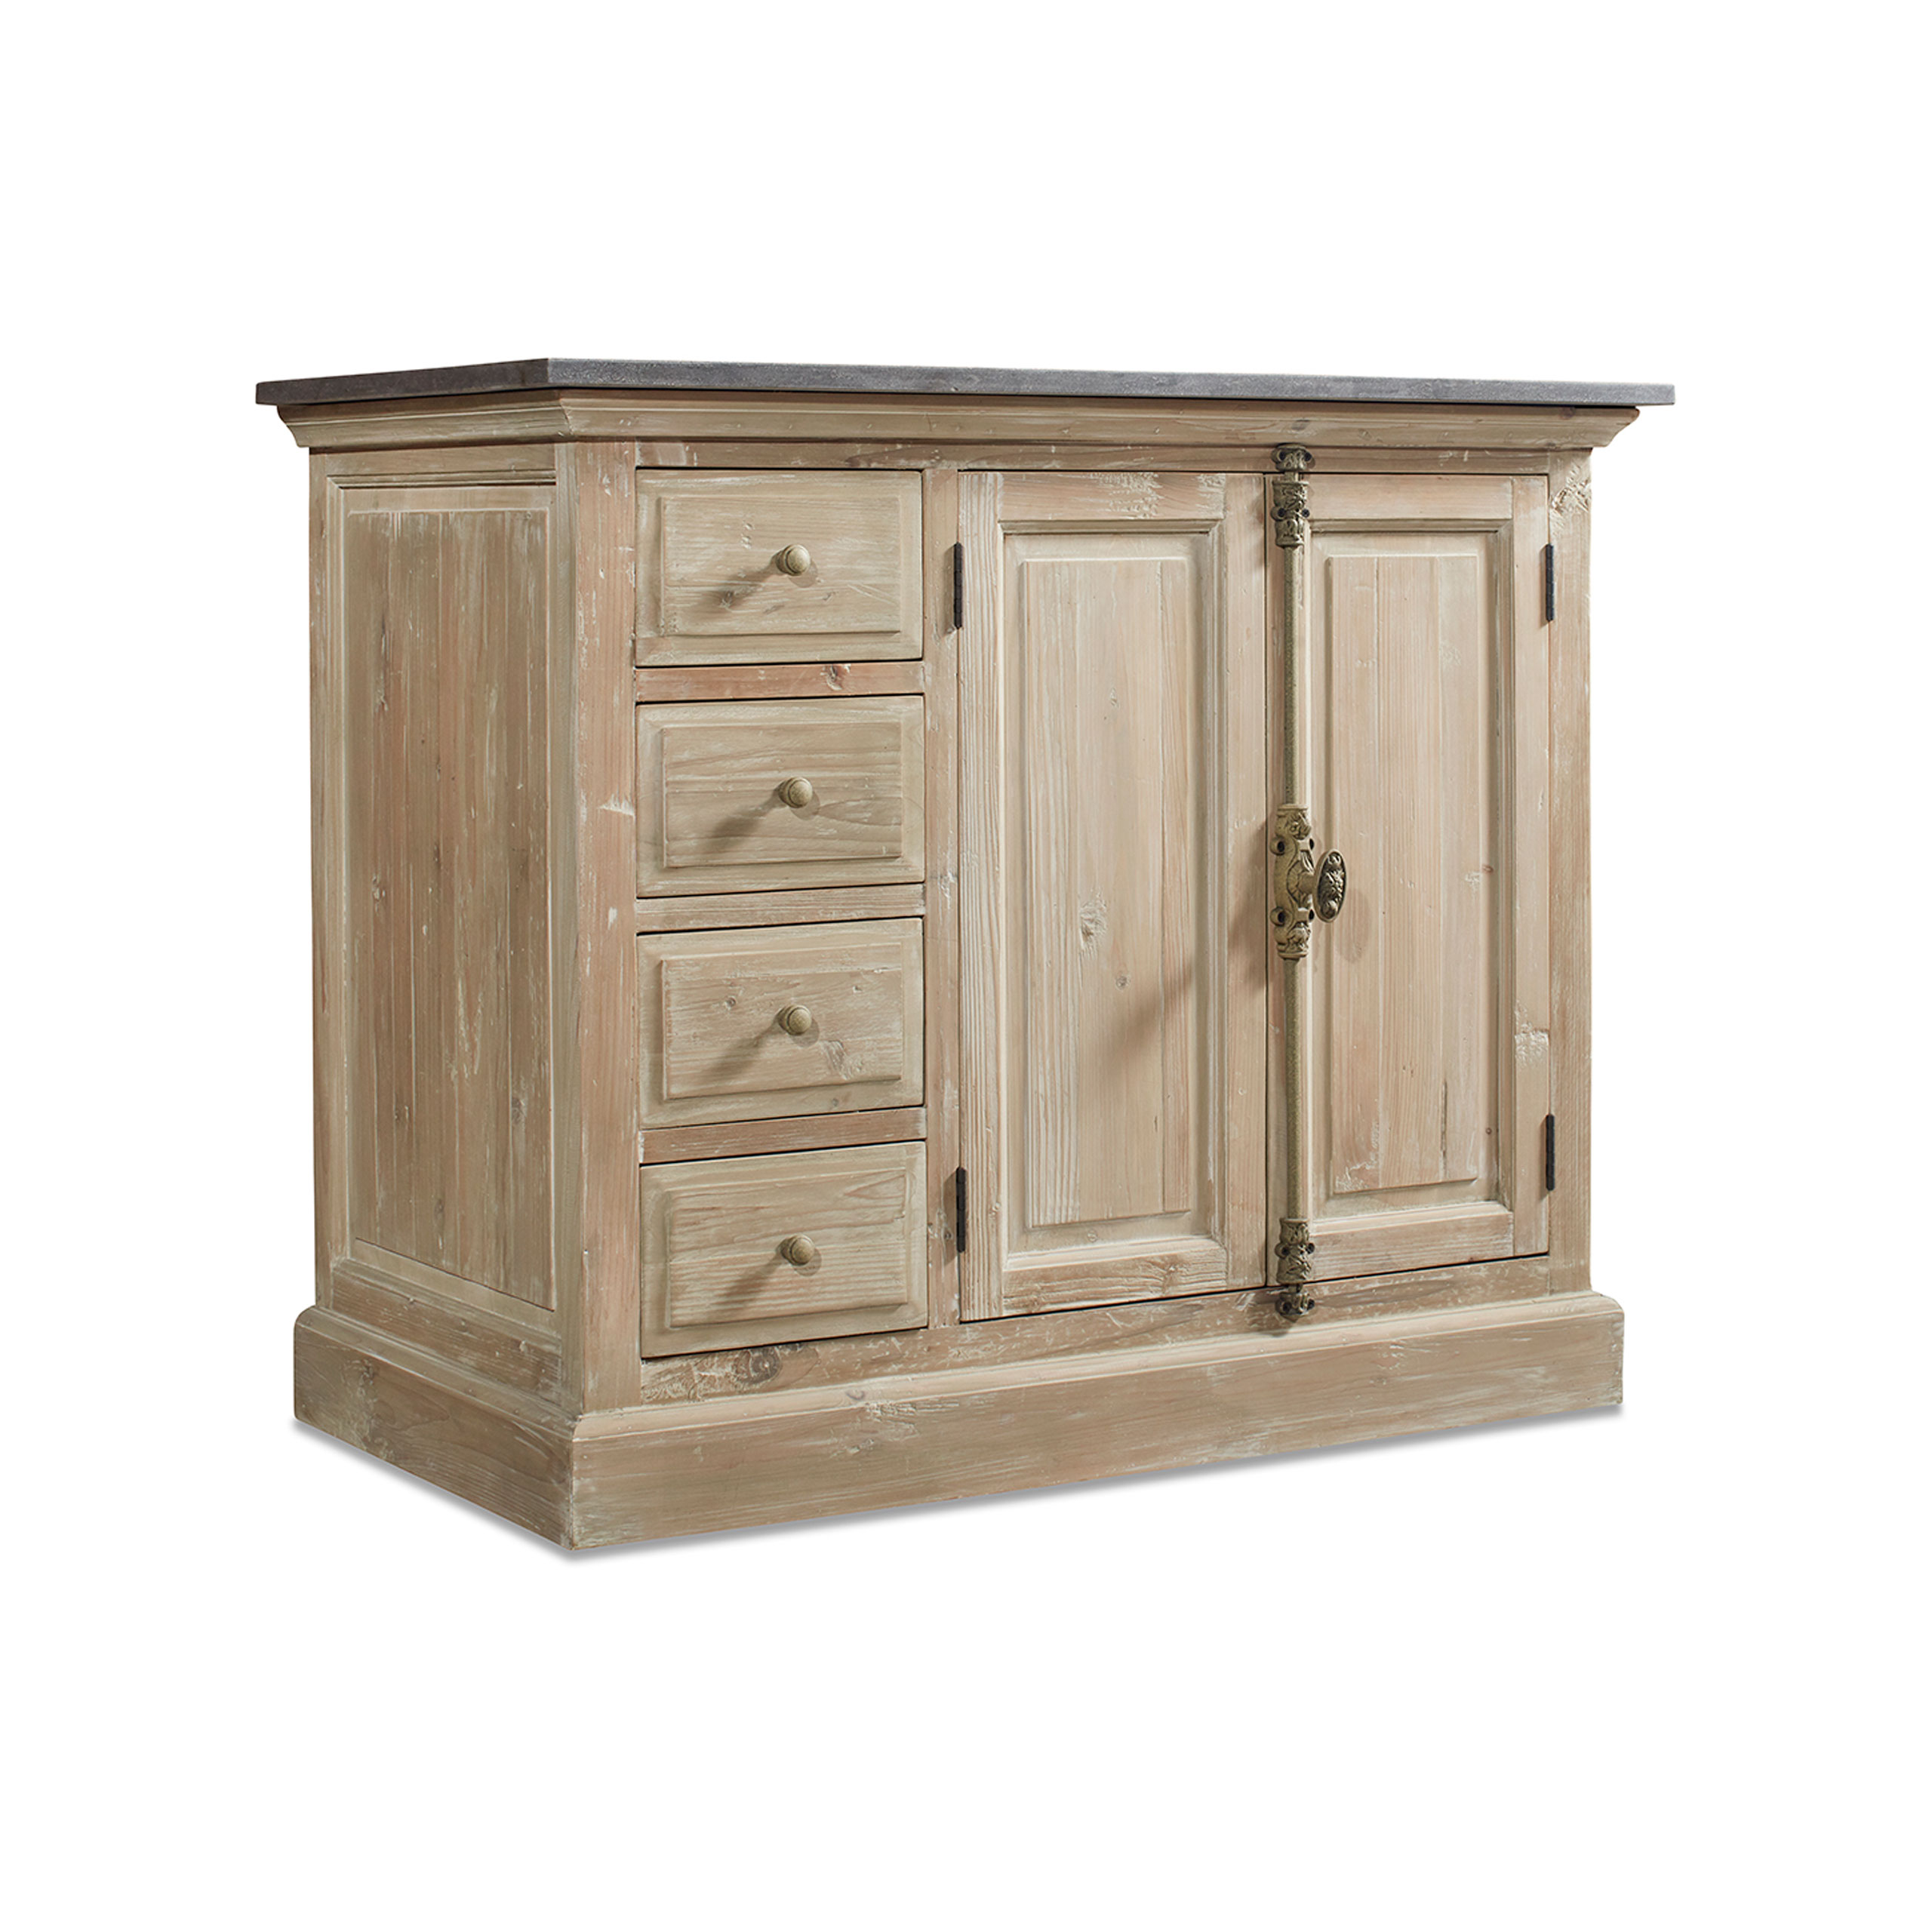 43" Handcrafted Reclaimed Pine Solid Wood WASH Finish Single Bath Vanity Right or Left sided 